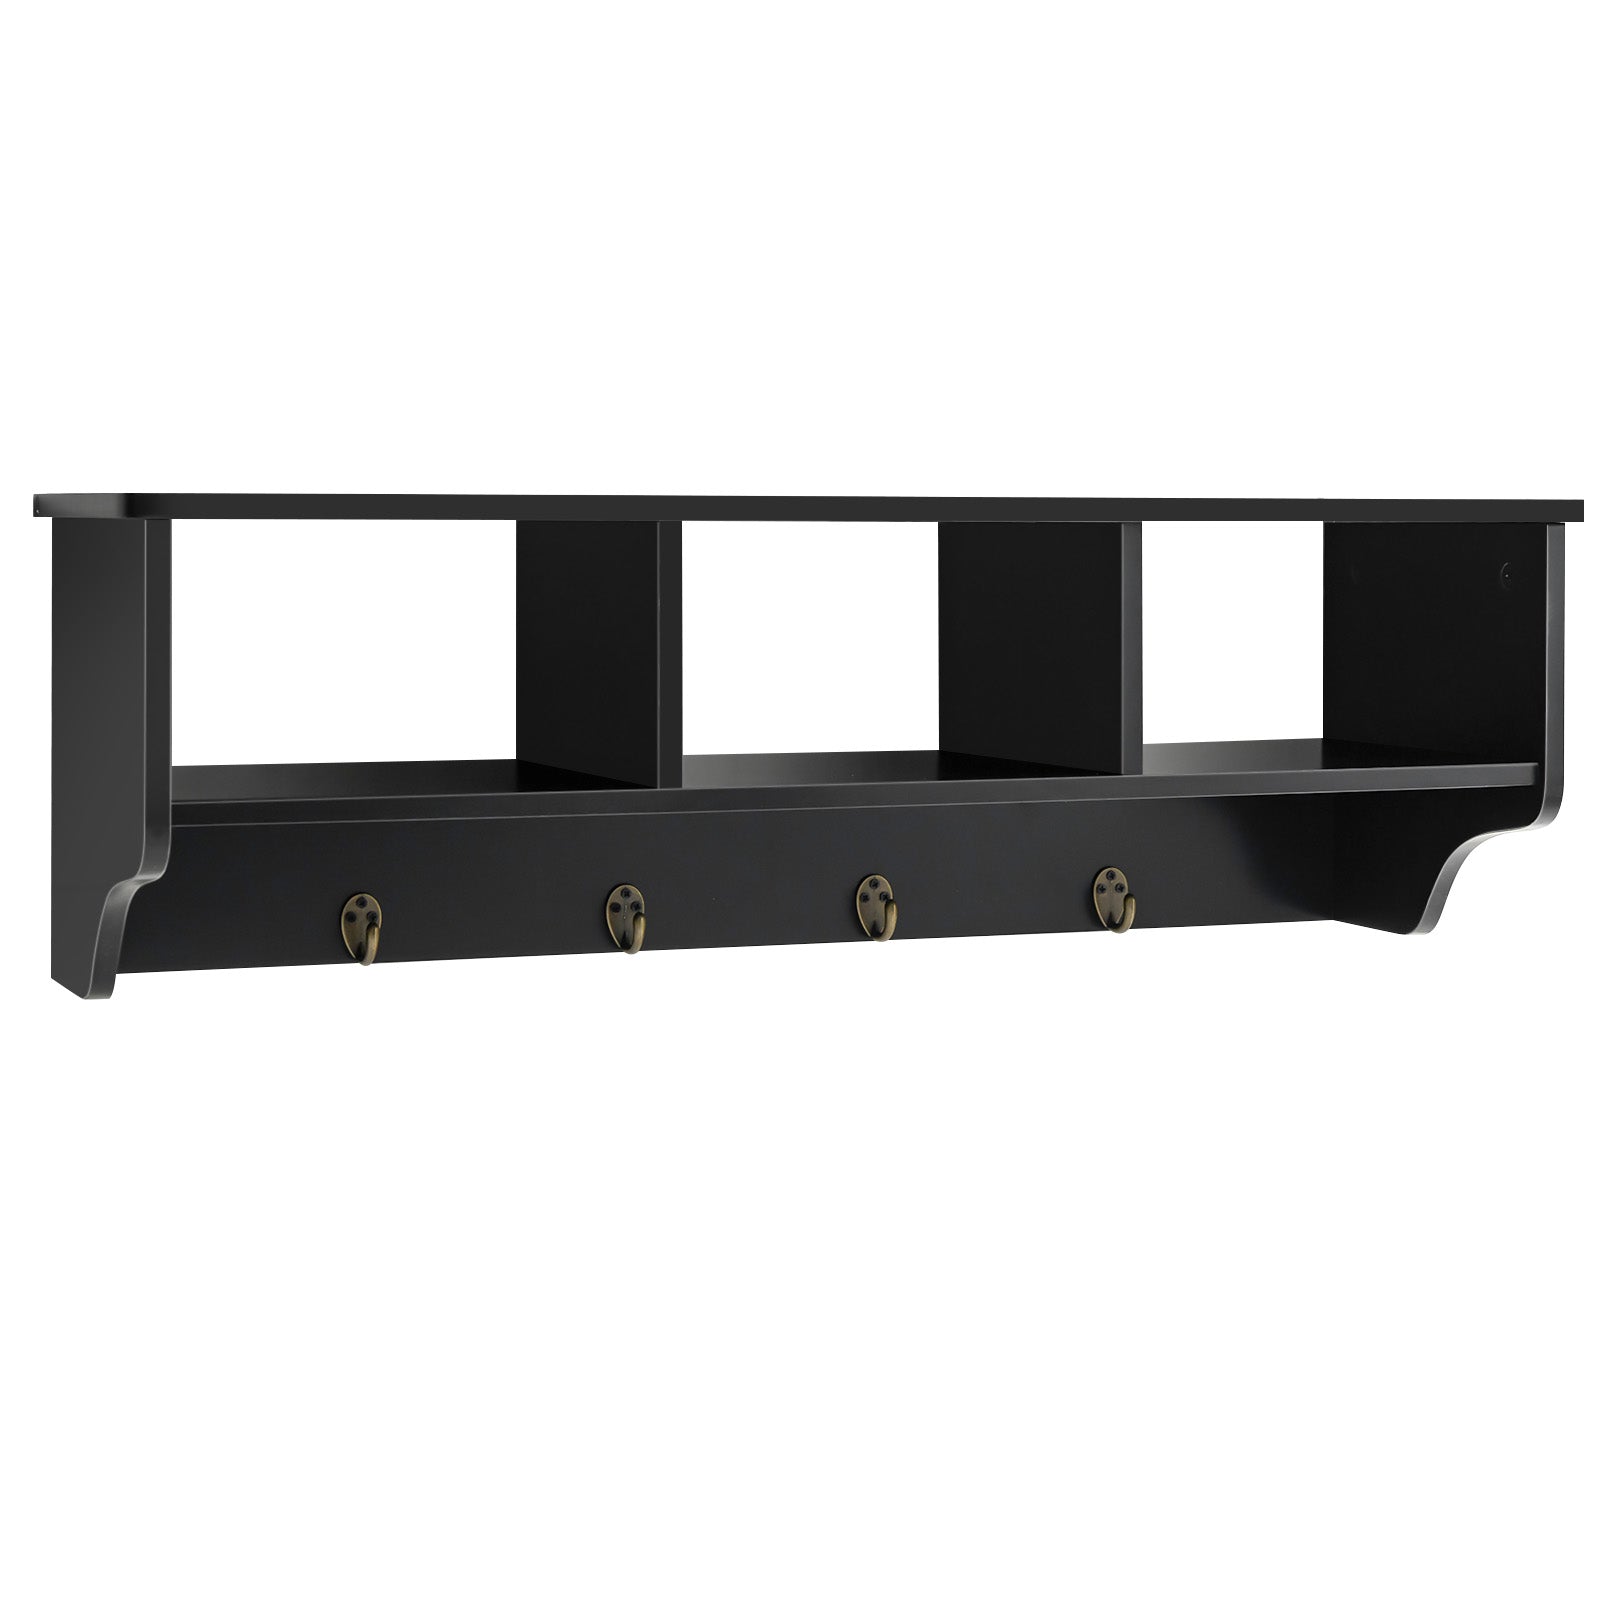 31-Inch Floating Storage Shelf with 3 Open Compartments and 4